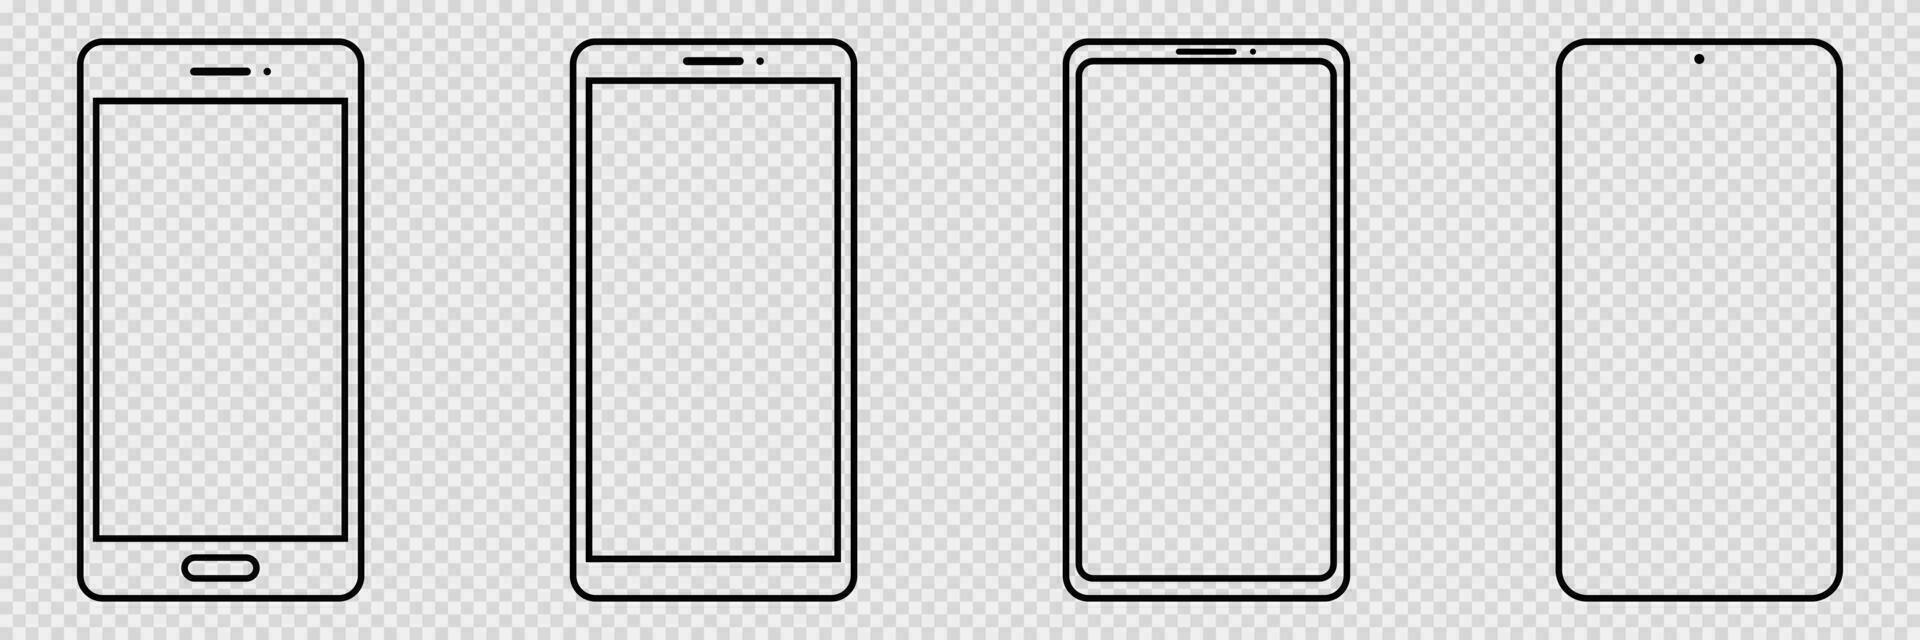 Outline smartphone icon. Isolated mobile silhouette. Device screen frame. Linear mockup of smartphone display. vector